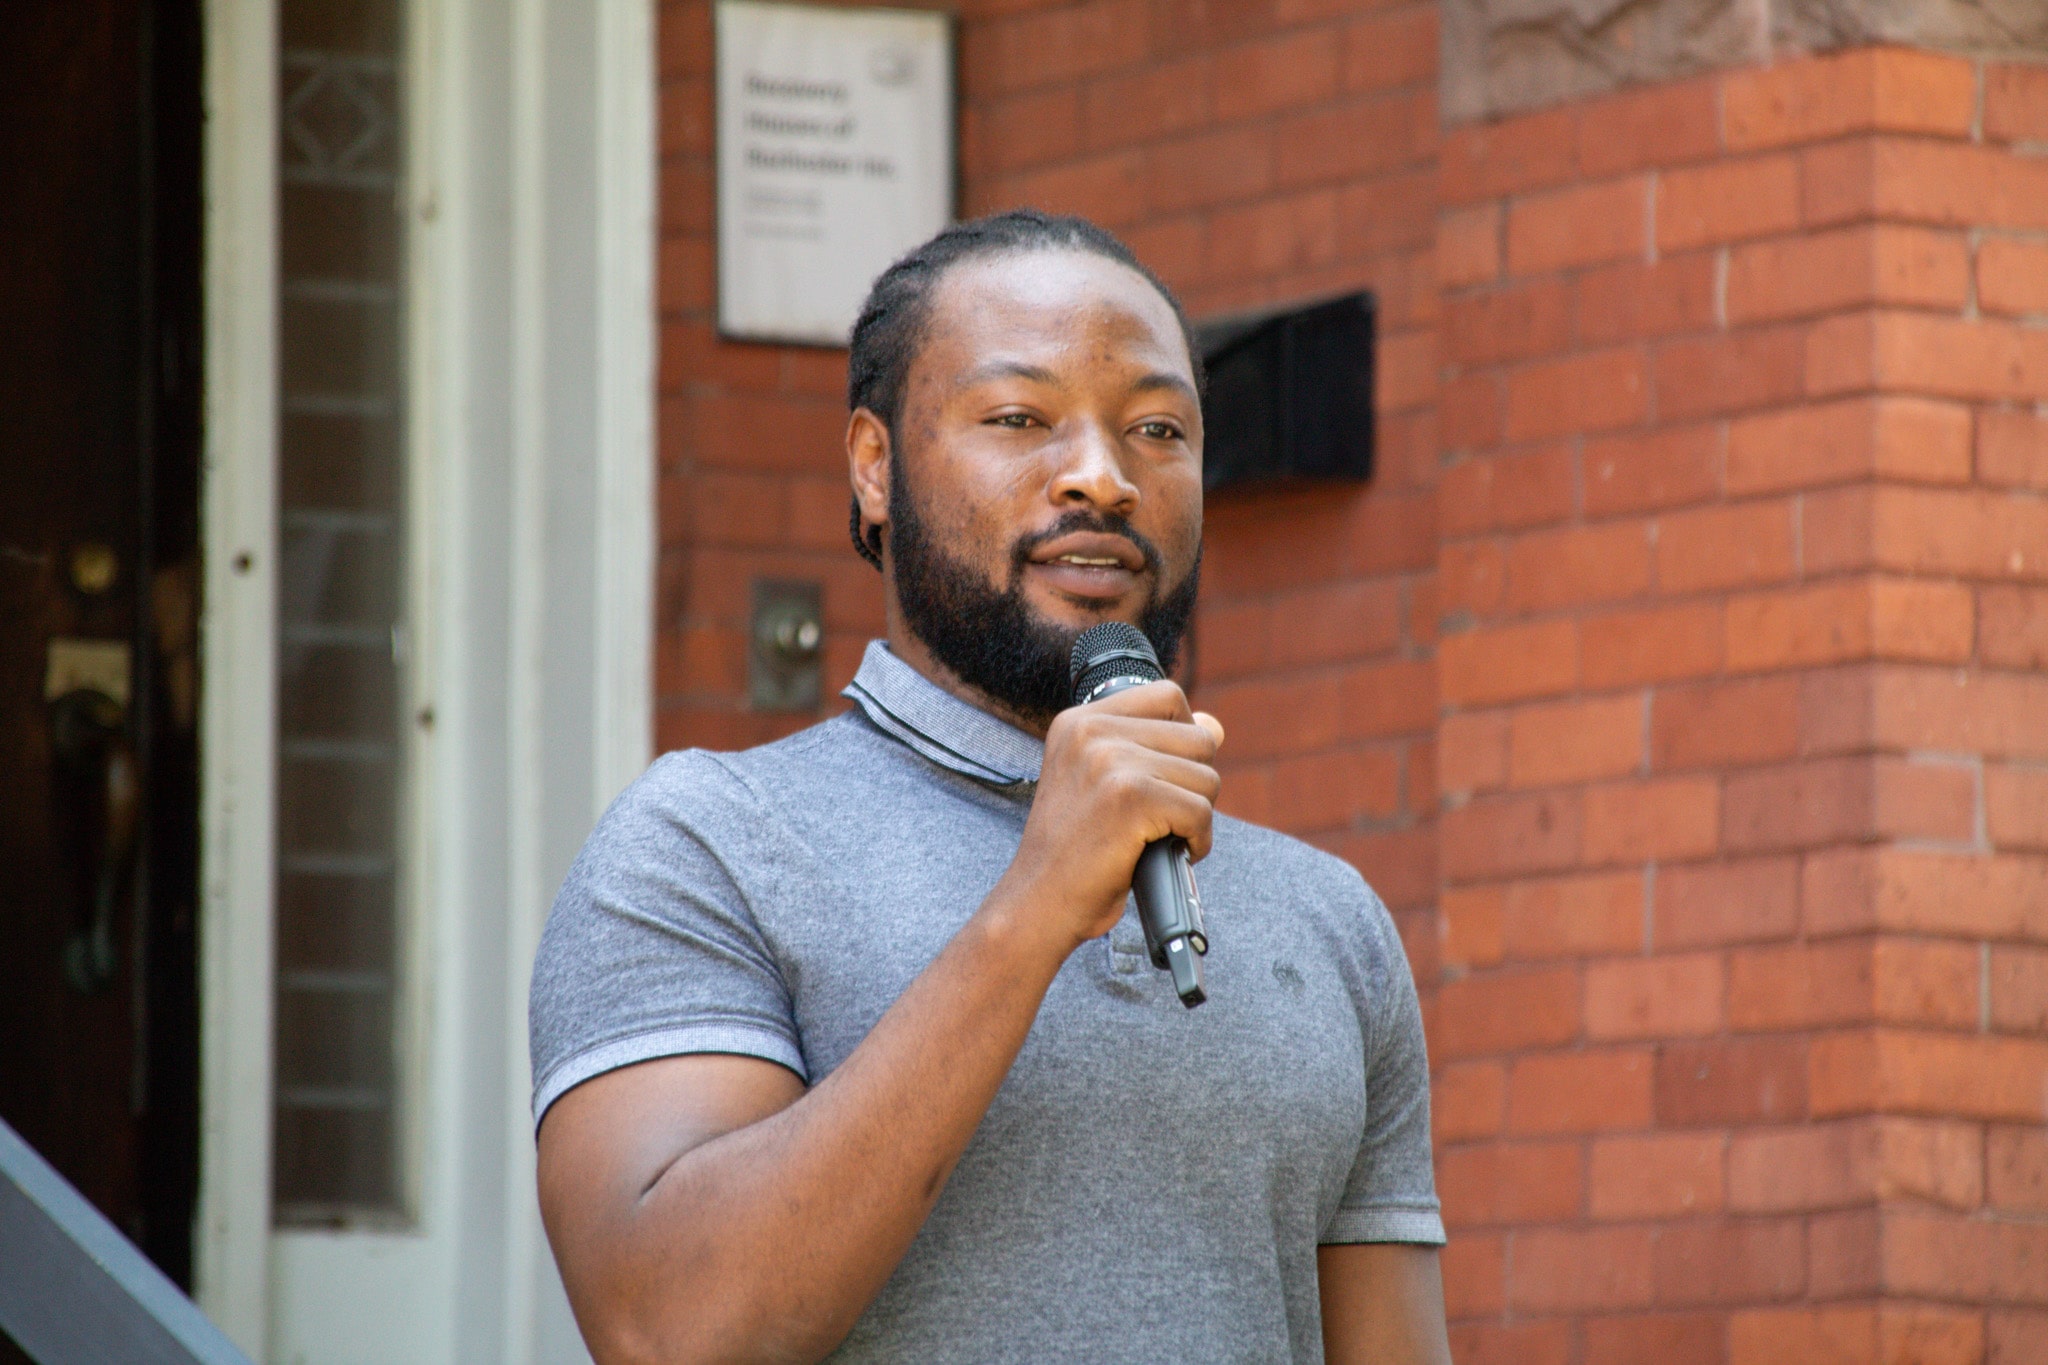 Gamji Rabiu Abu-Ba'are speaks at the Recovery Houses collaboration launch, standing on the house's front steps.